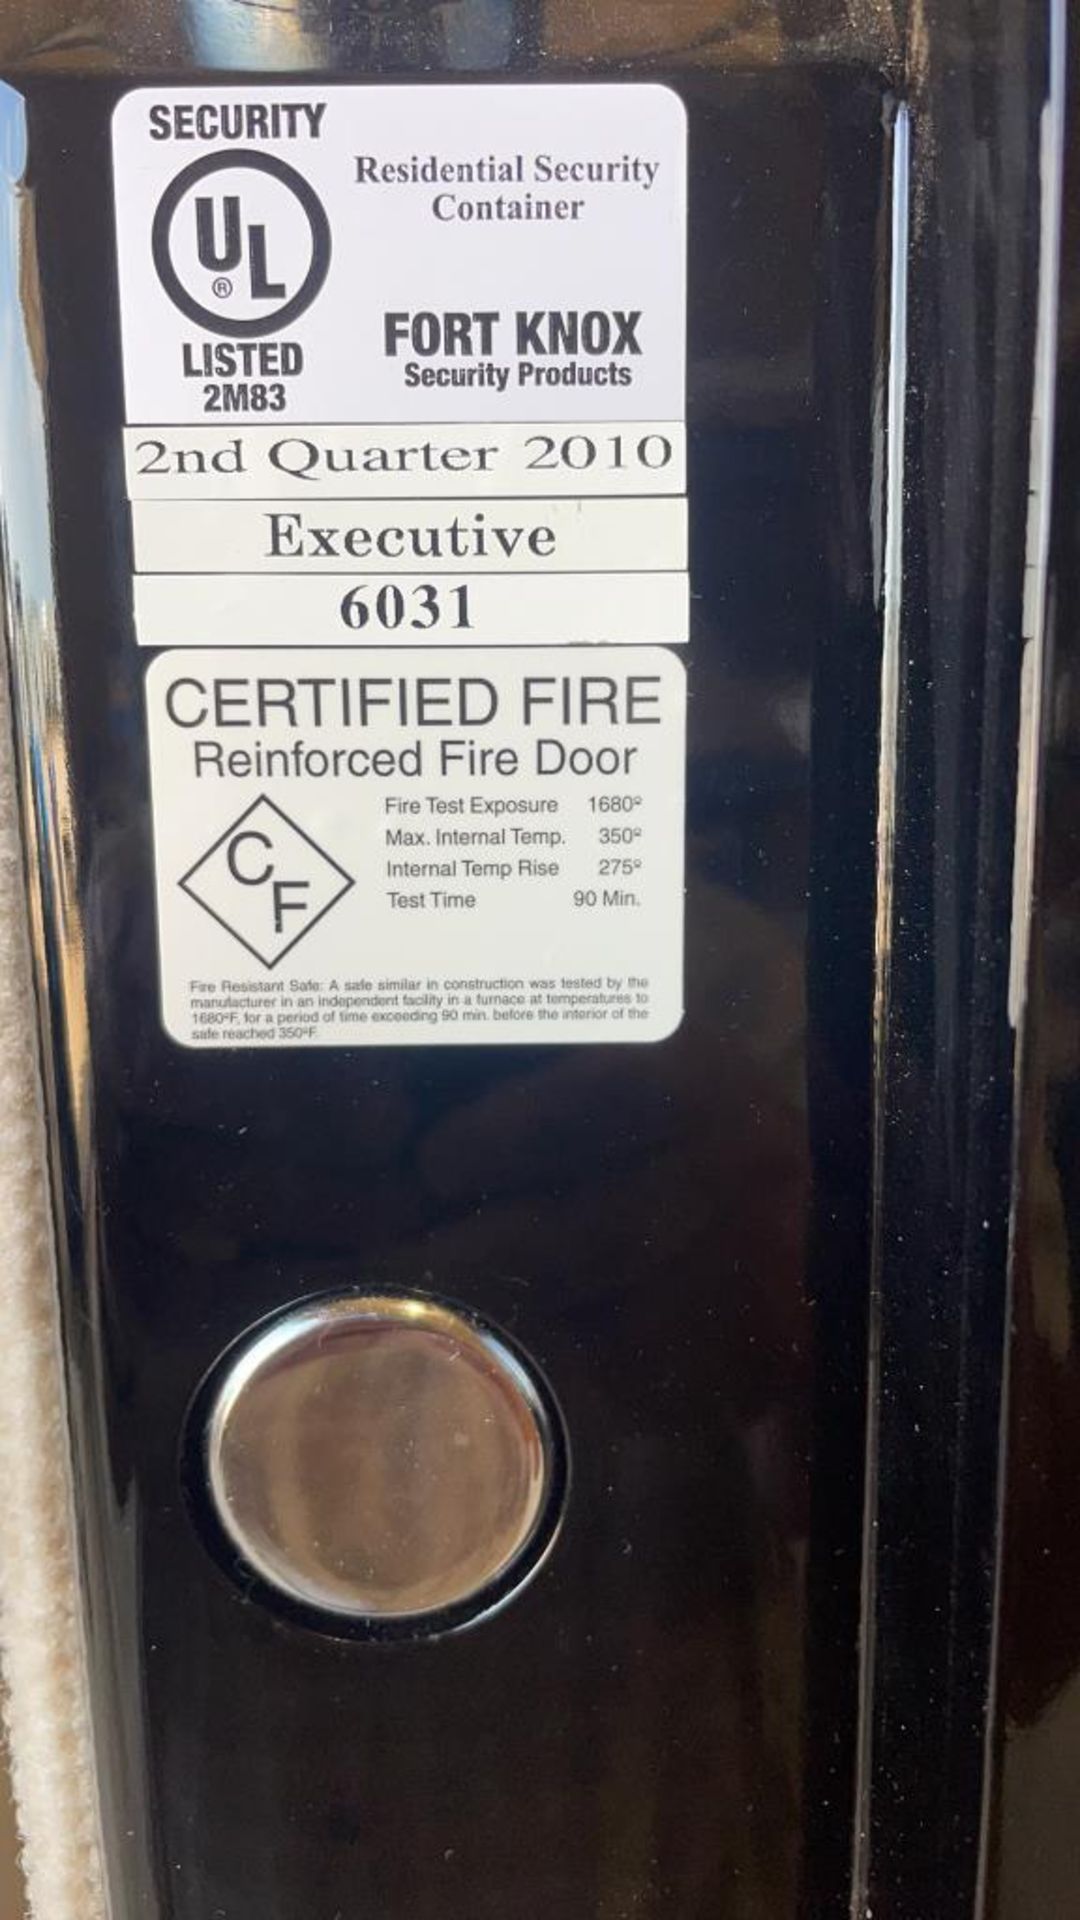 Fort Knox Fire rated Gun safe - Image 10 of 12